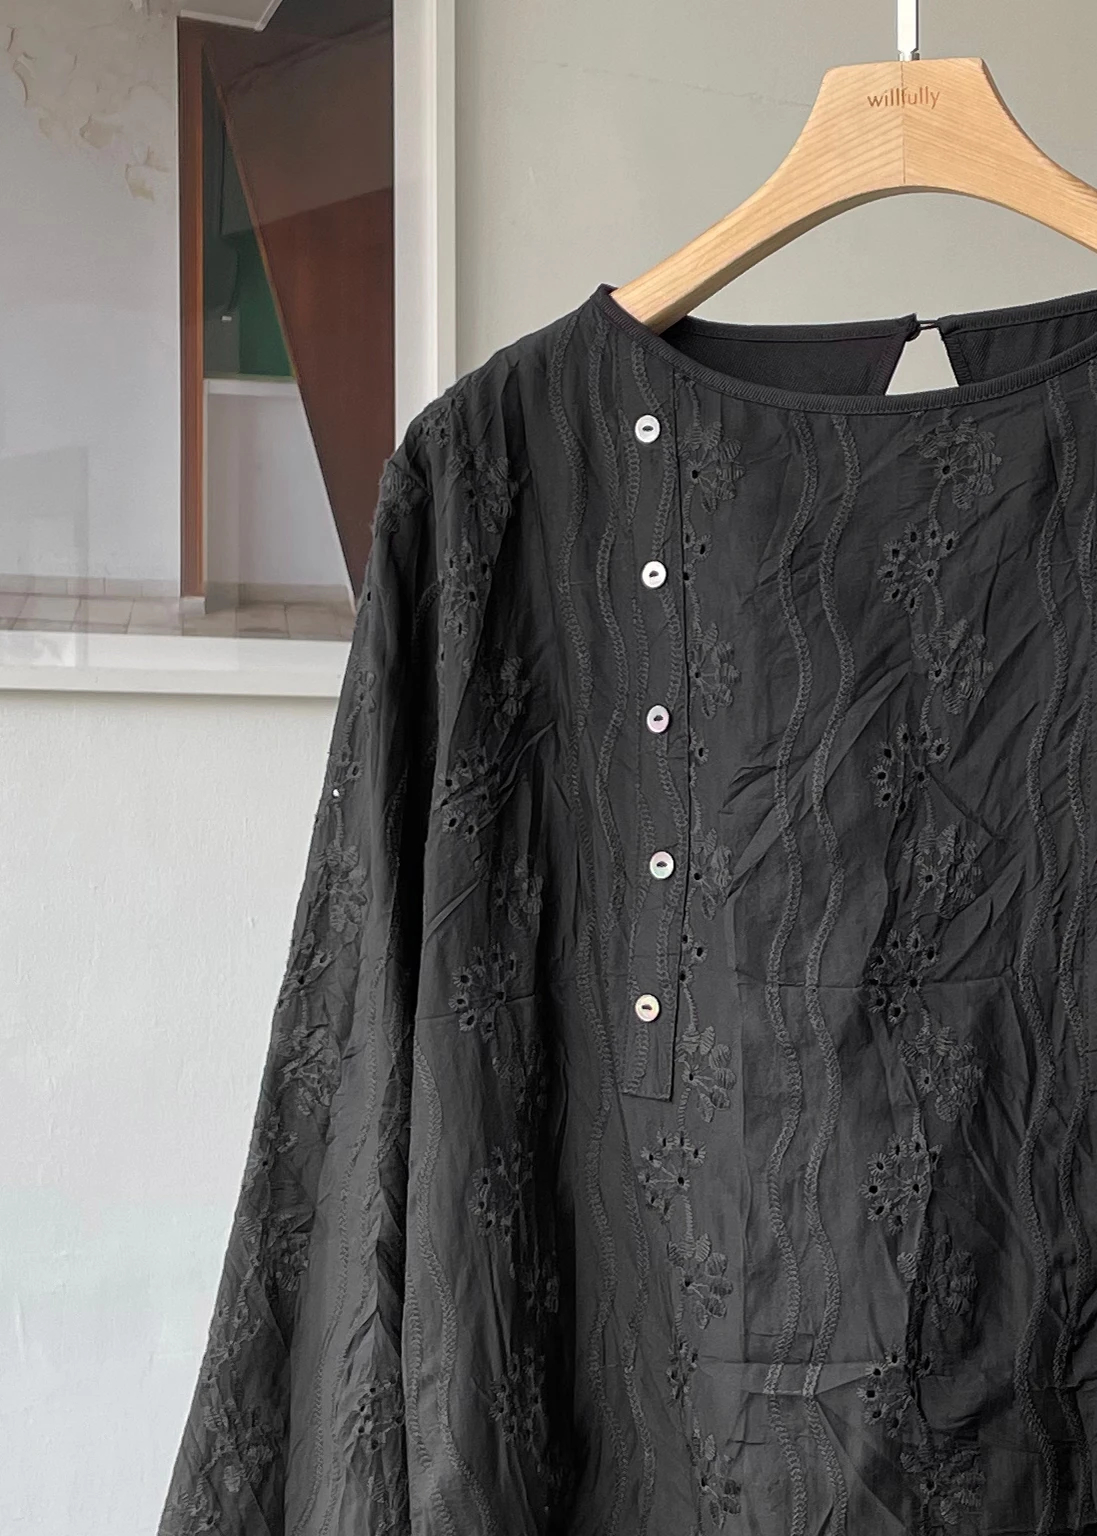 mi様専用 willfully different material lace-